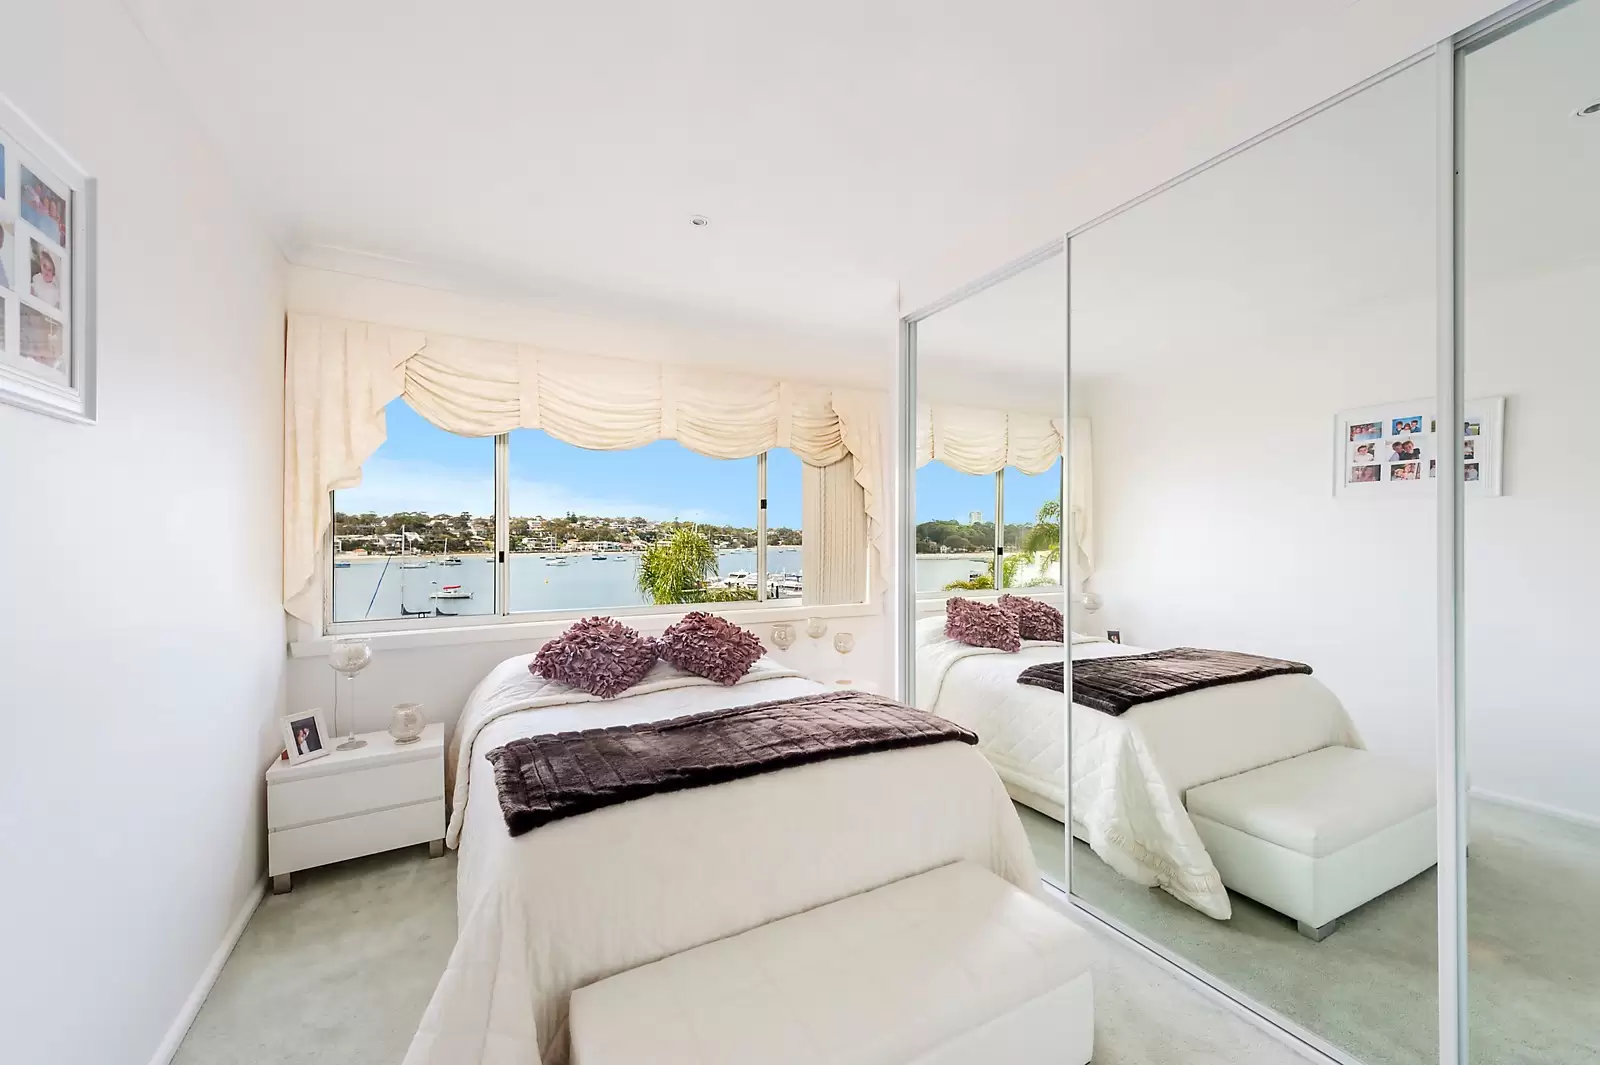 Photo #11: 2 Coolangatta Avenue, Burraneer - Sold by Sydney Sotheby's International Realty